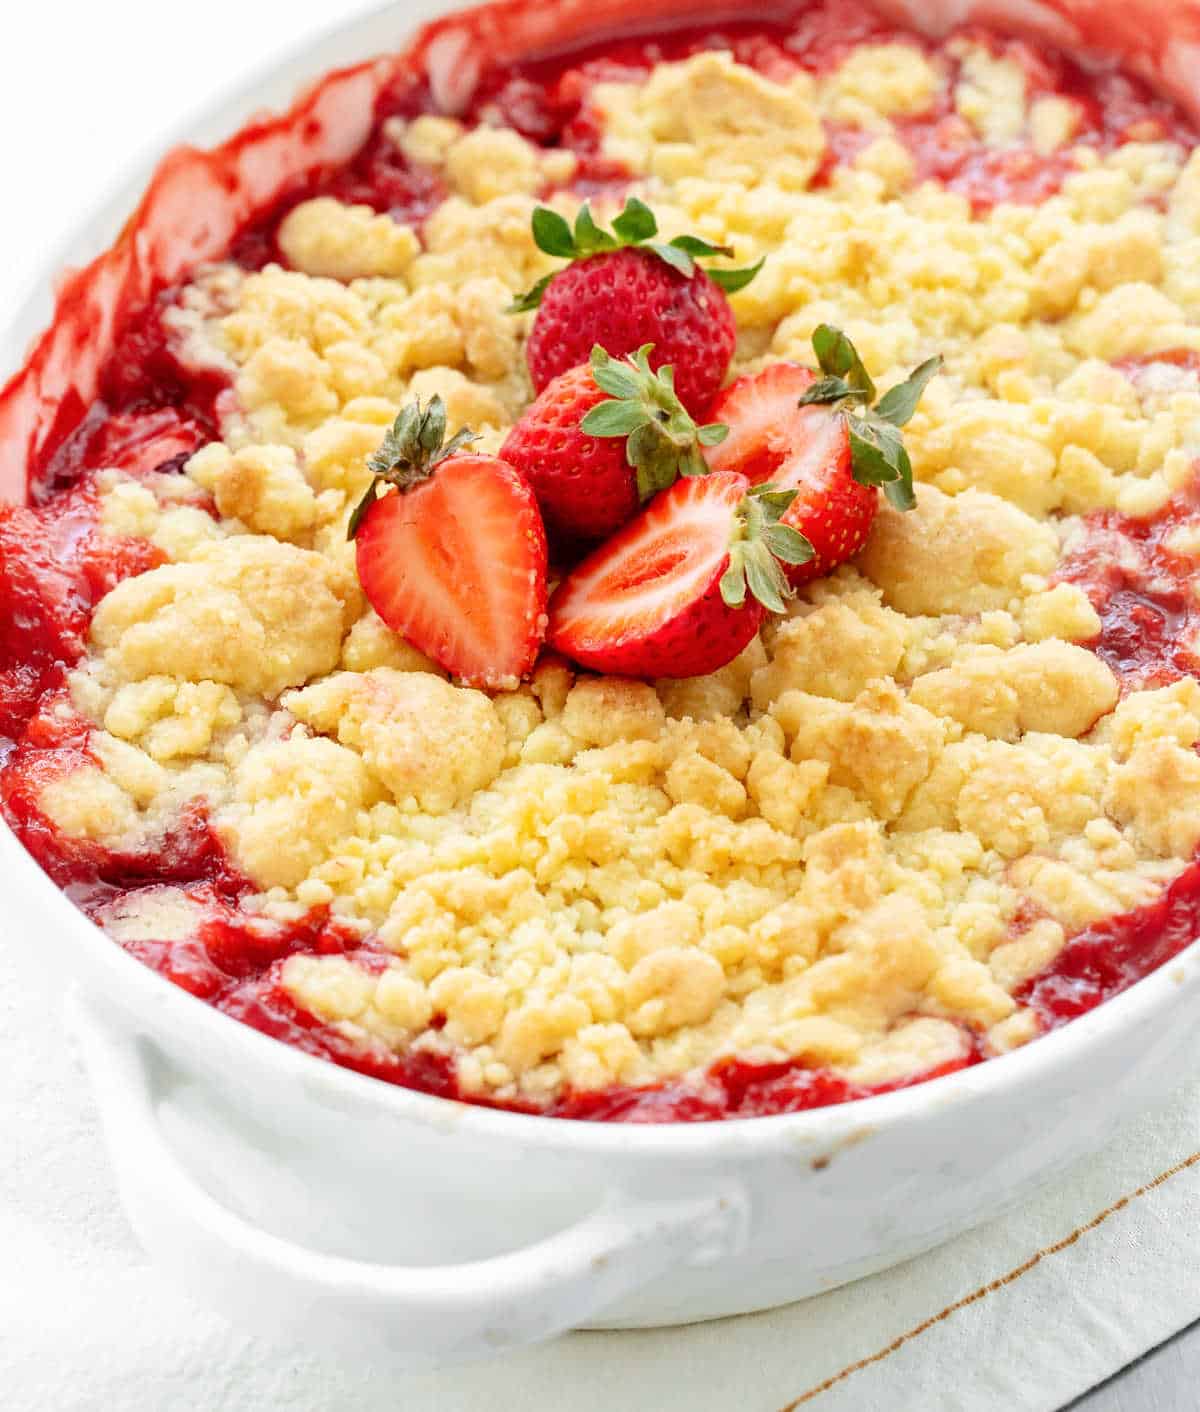 Baked strawberry dump cake in oval white baking pan with fresh strawberries on top; partial image.